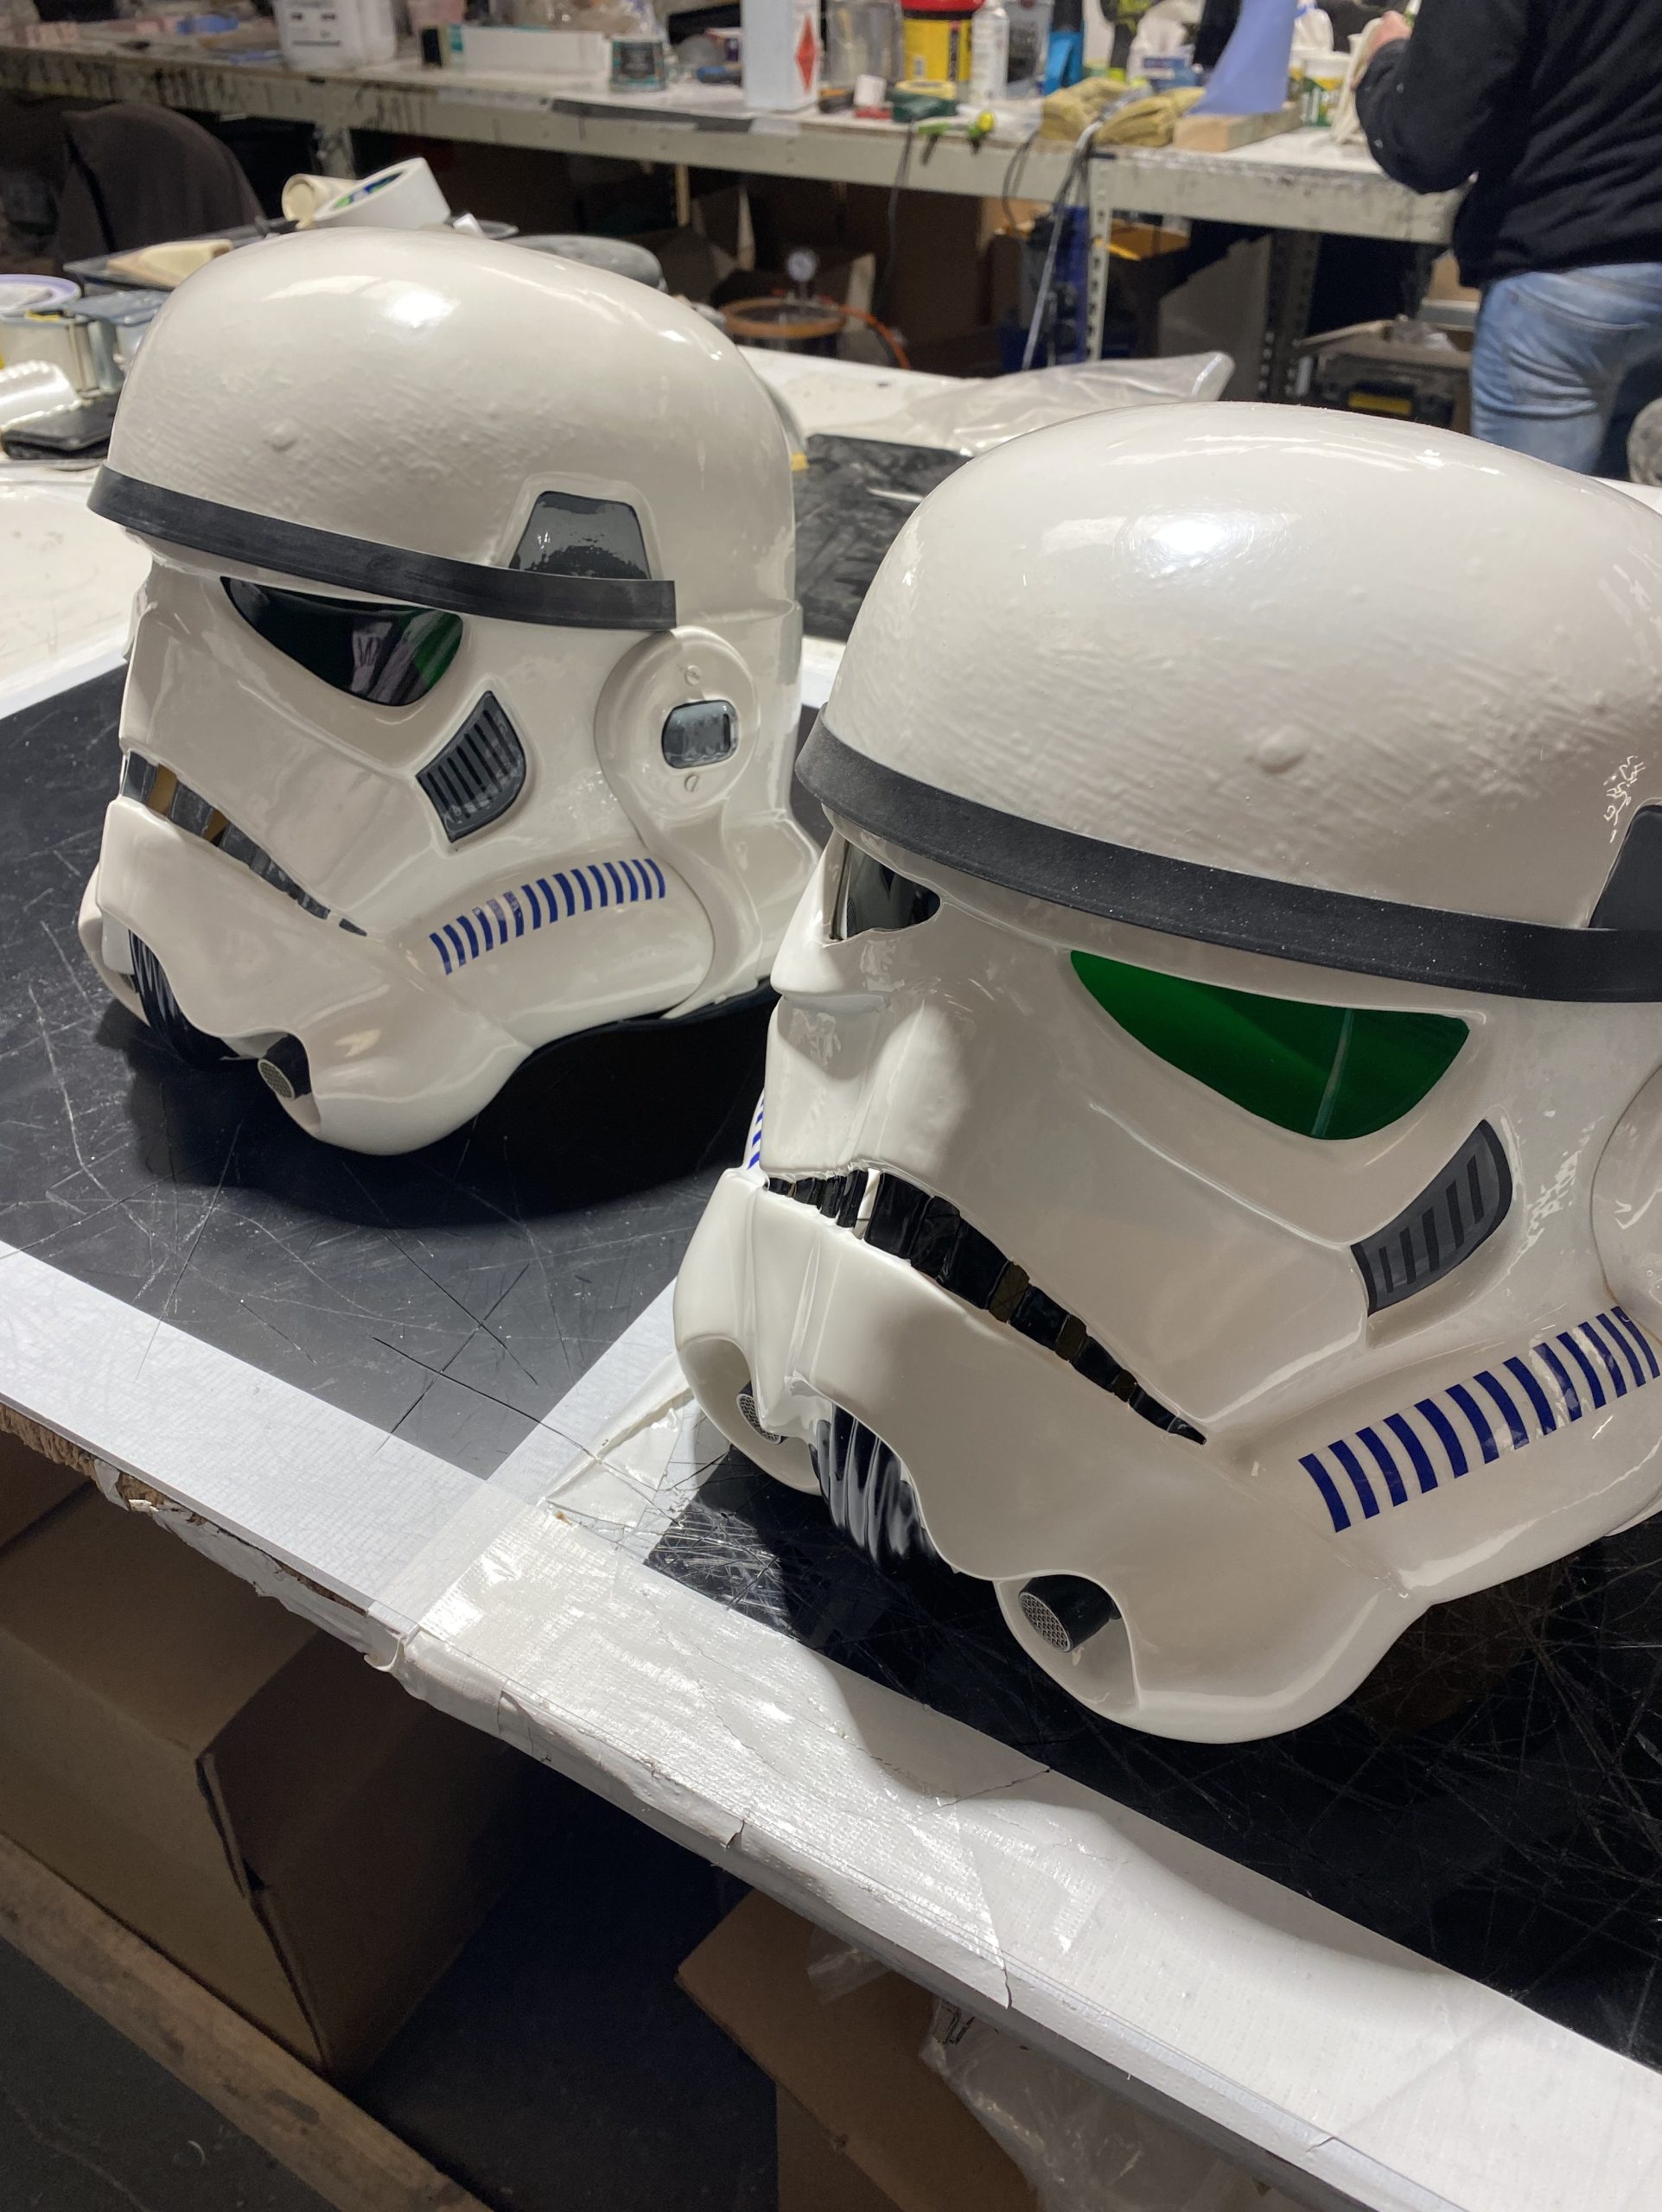 Inside the Stockport warehouse making Star Wars props for the big screen, The Manc